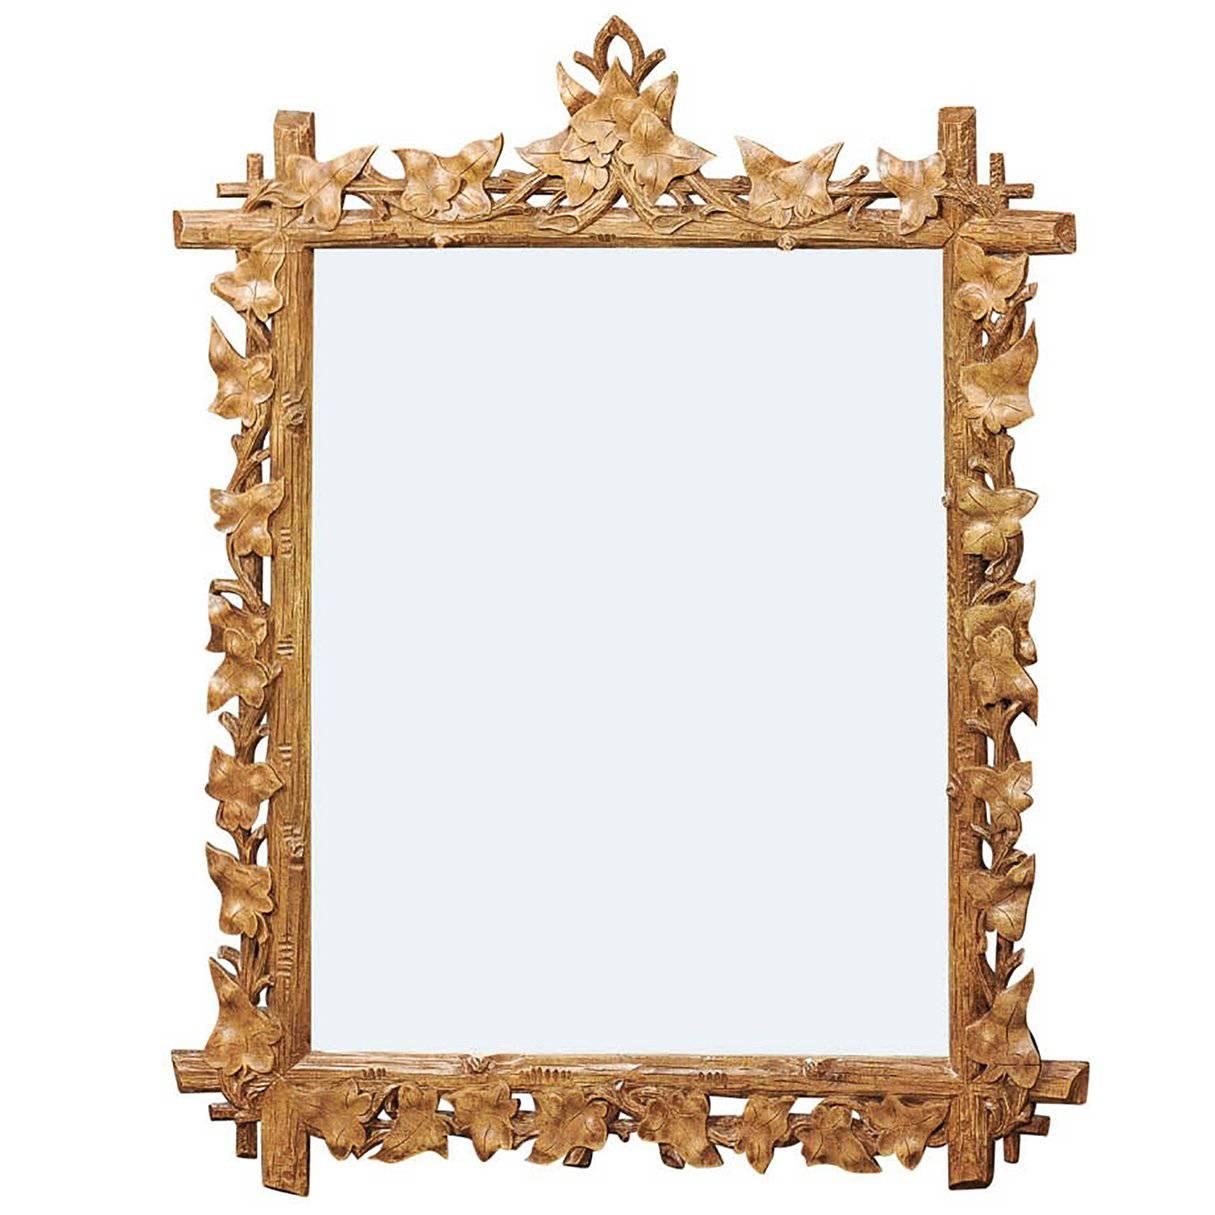 French Mid-20th Century Black Forest Faux-Bois Mirror with Leaf Motifs For Sale